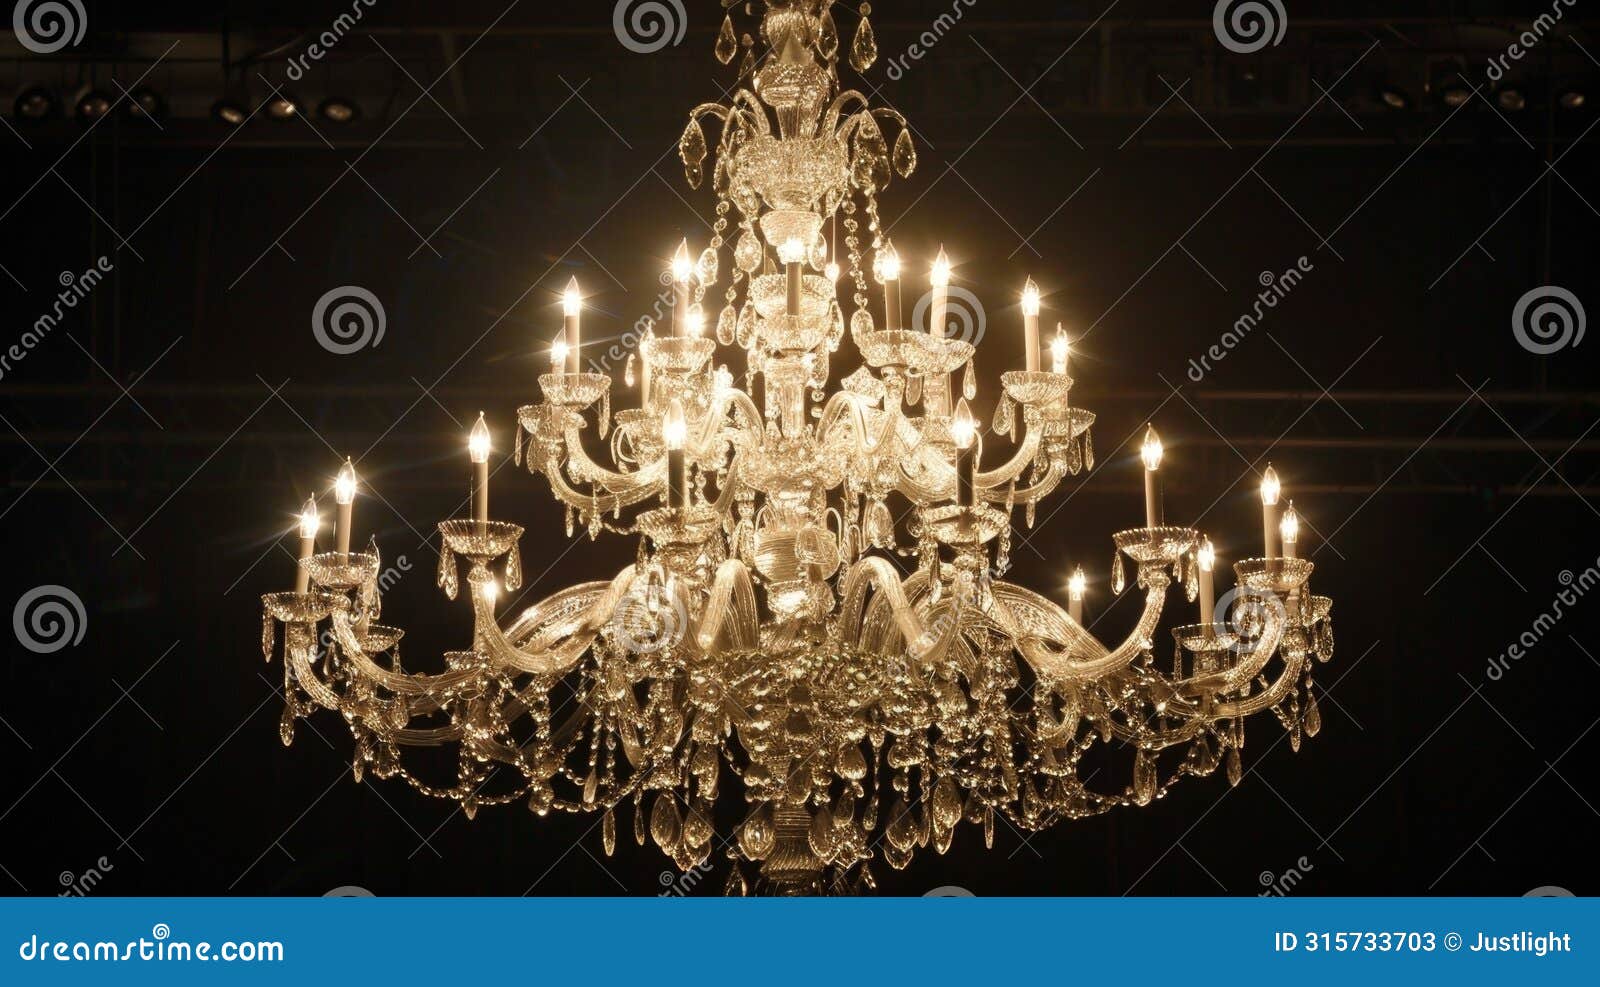 dimmed dazzle a majestic chandelier casts a gentle glow over a sea of twirling aristocrats creating a captivating scene